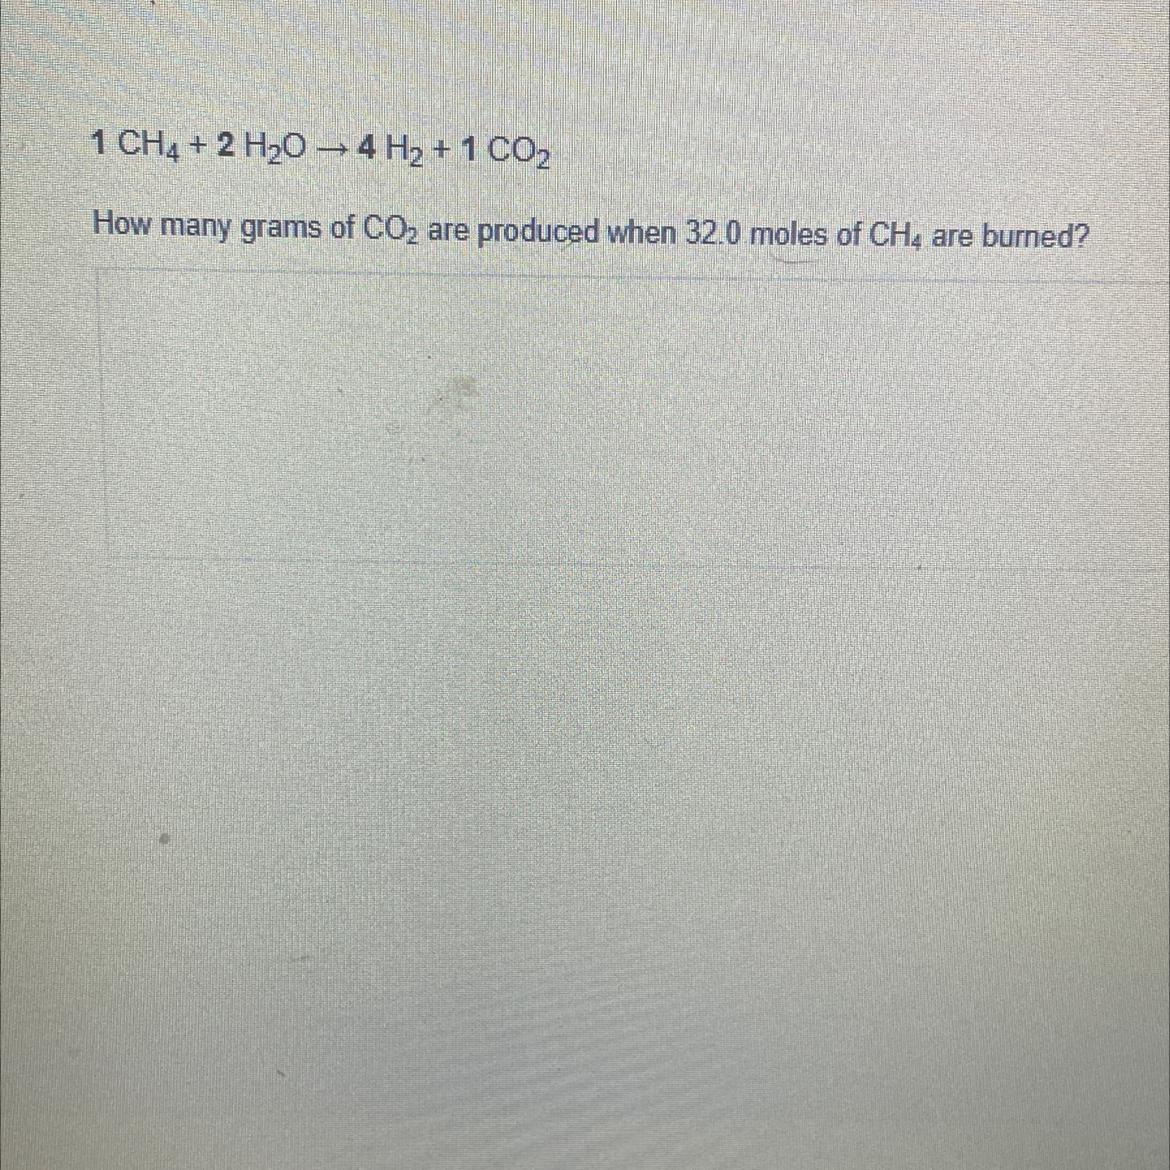 I Need Help With Thisand Can You So The Work If You Can!!